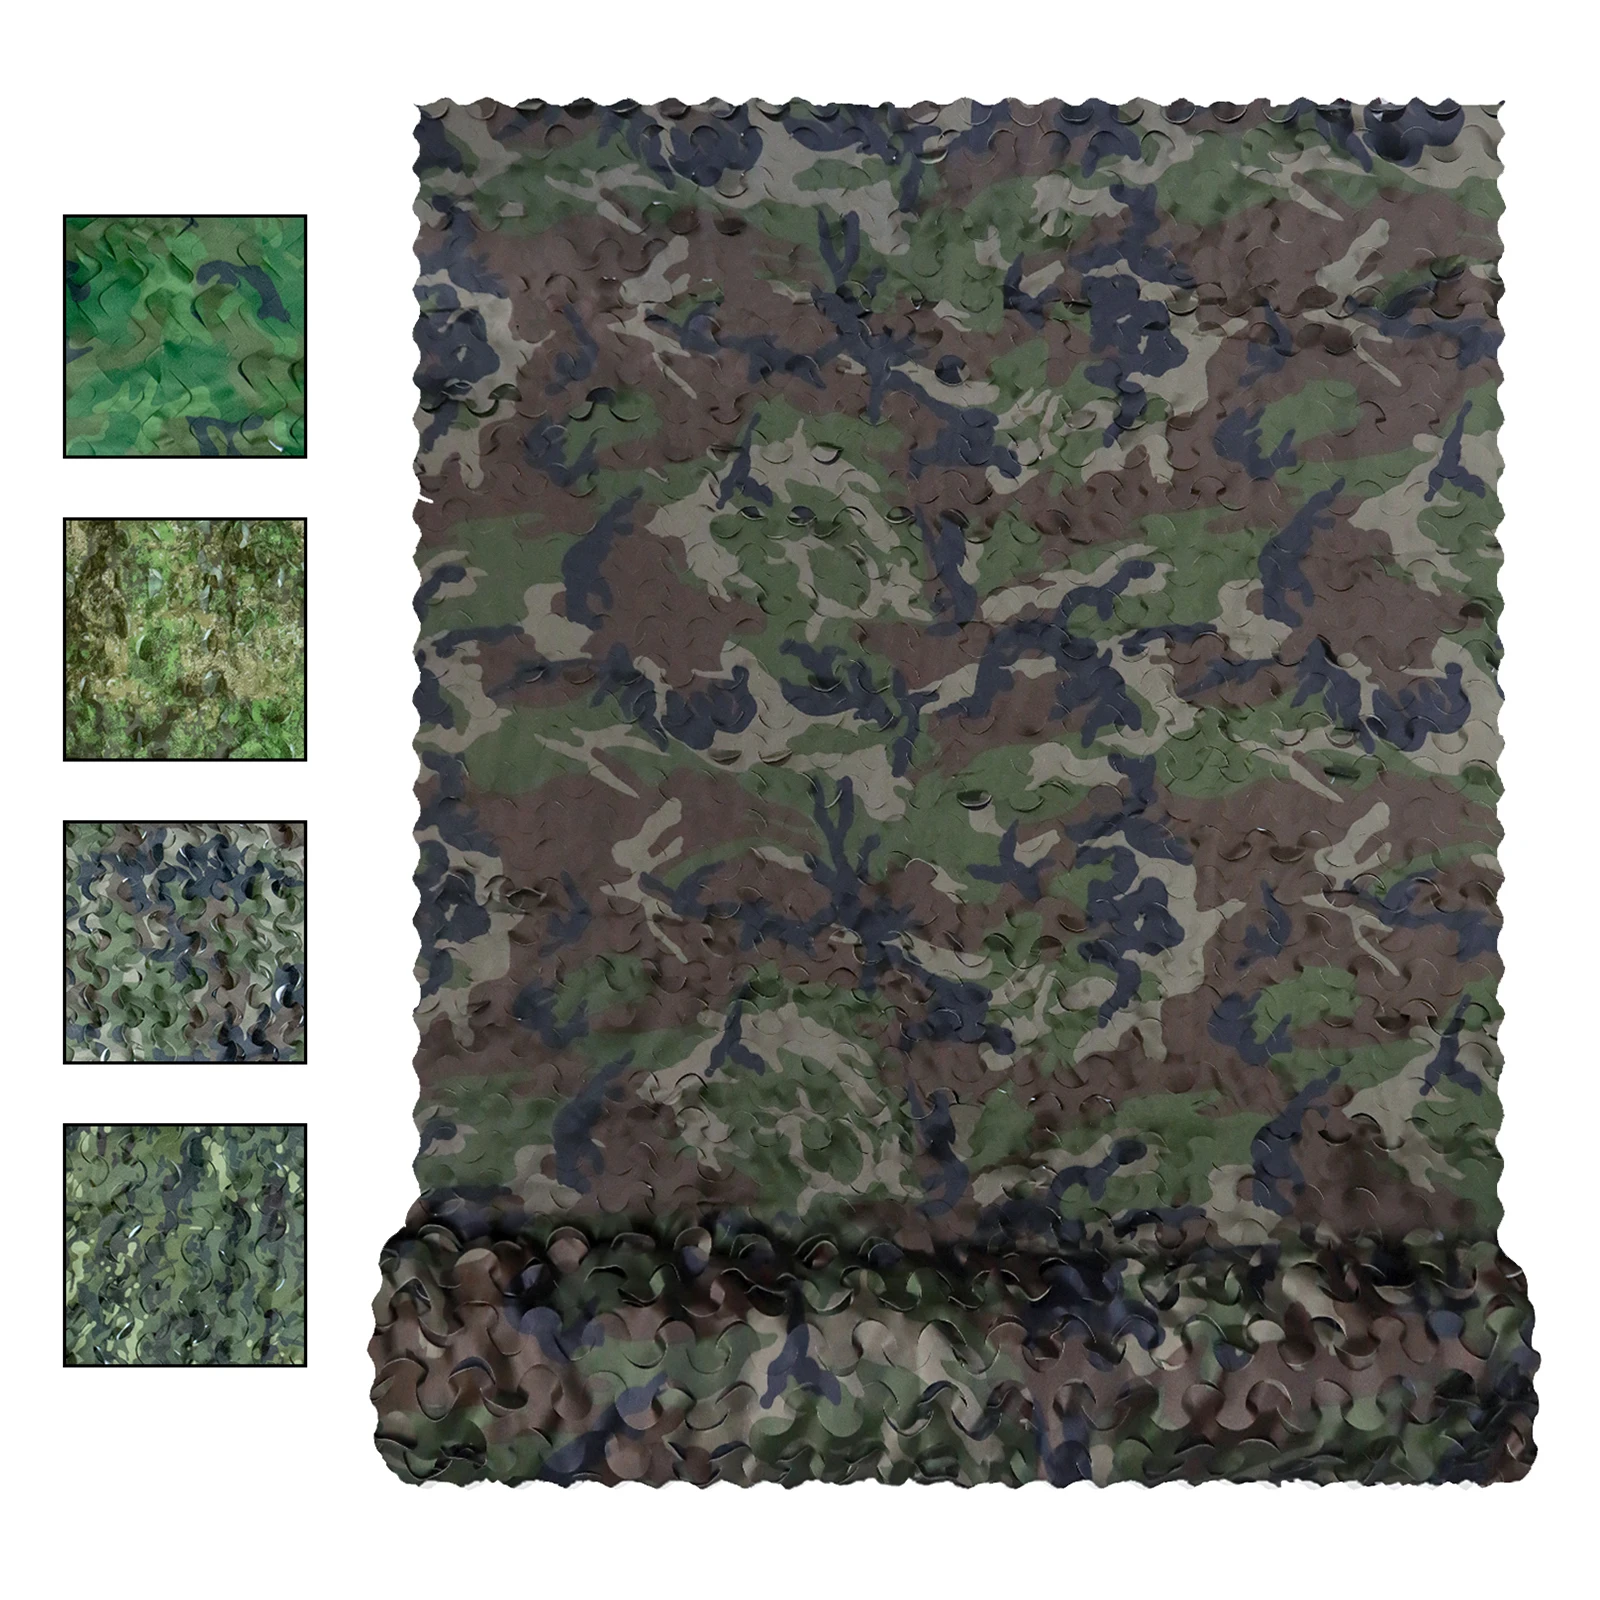 

Camo Netting Camouflage Net Blinds Great For Sunshade Camping Shooting Bulk Roll Cover Blind For Hunting Decoration Sun Shade